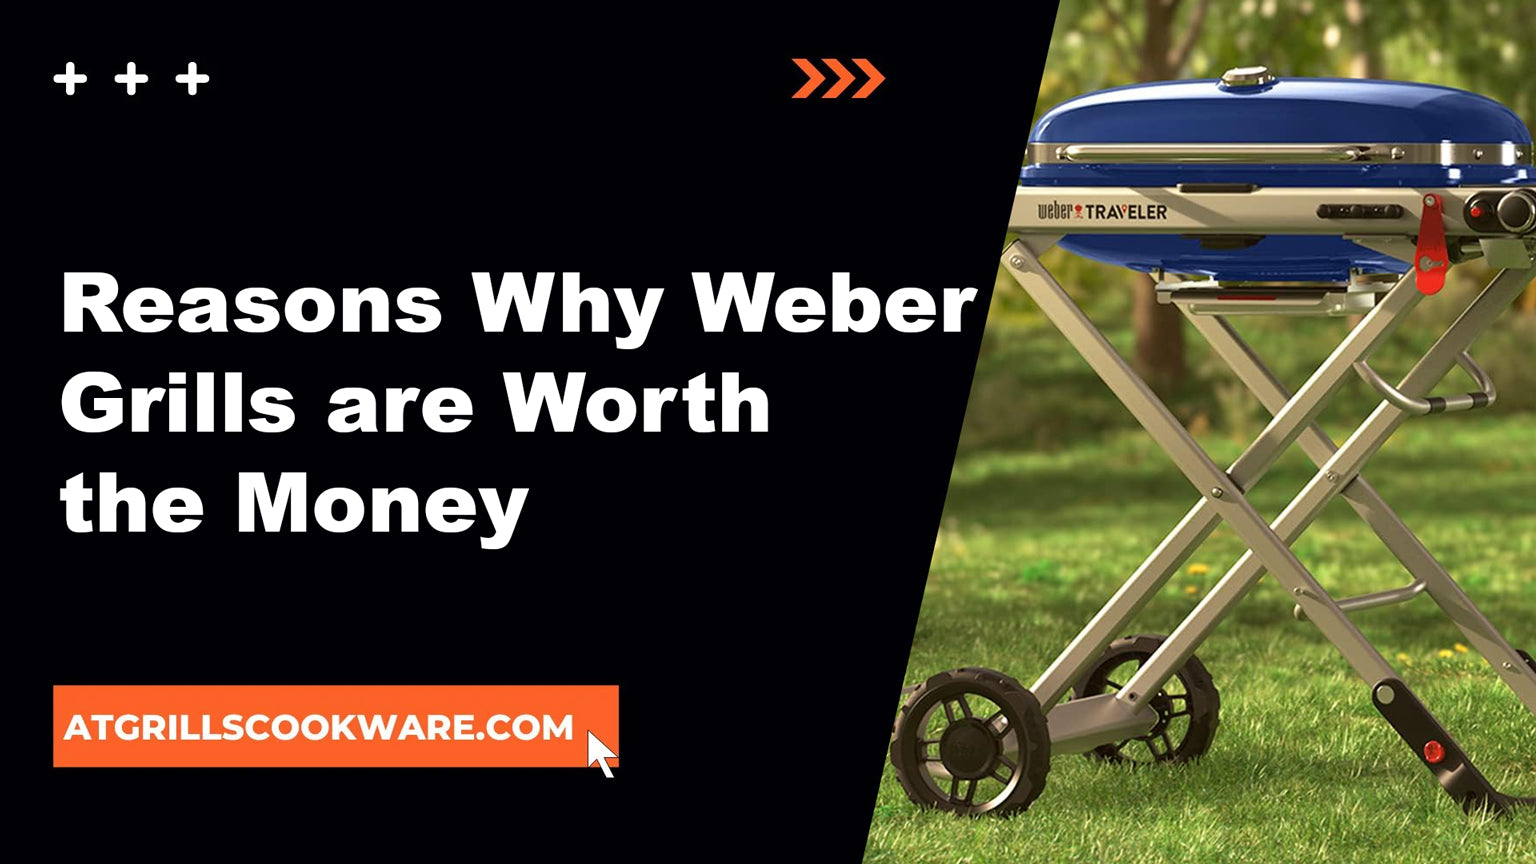 Reasons Why Weber Grills are Worth the Money